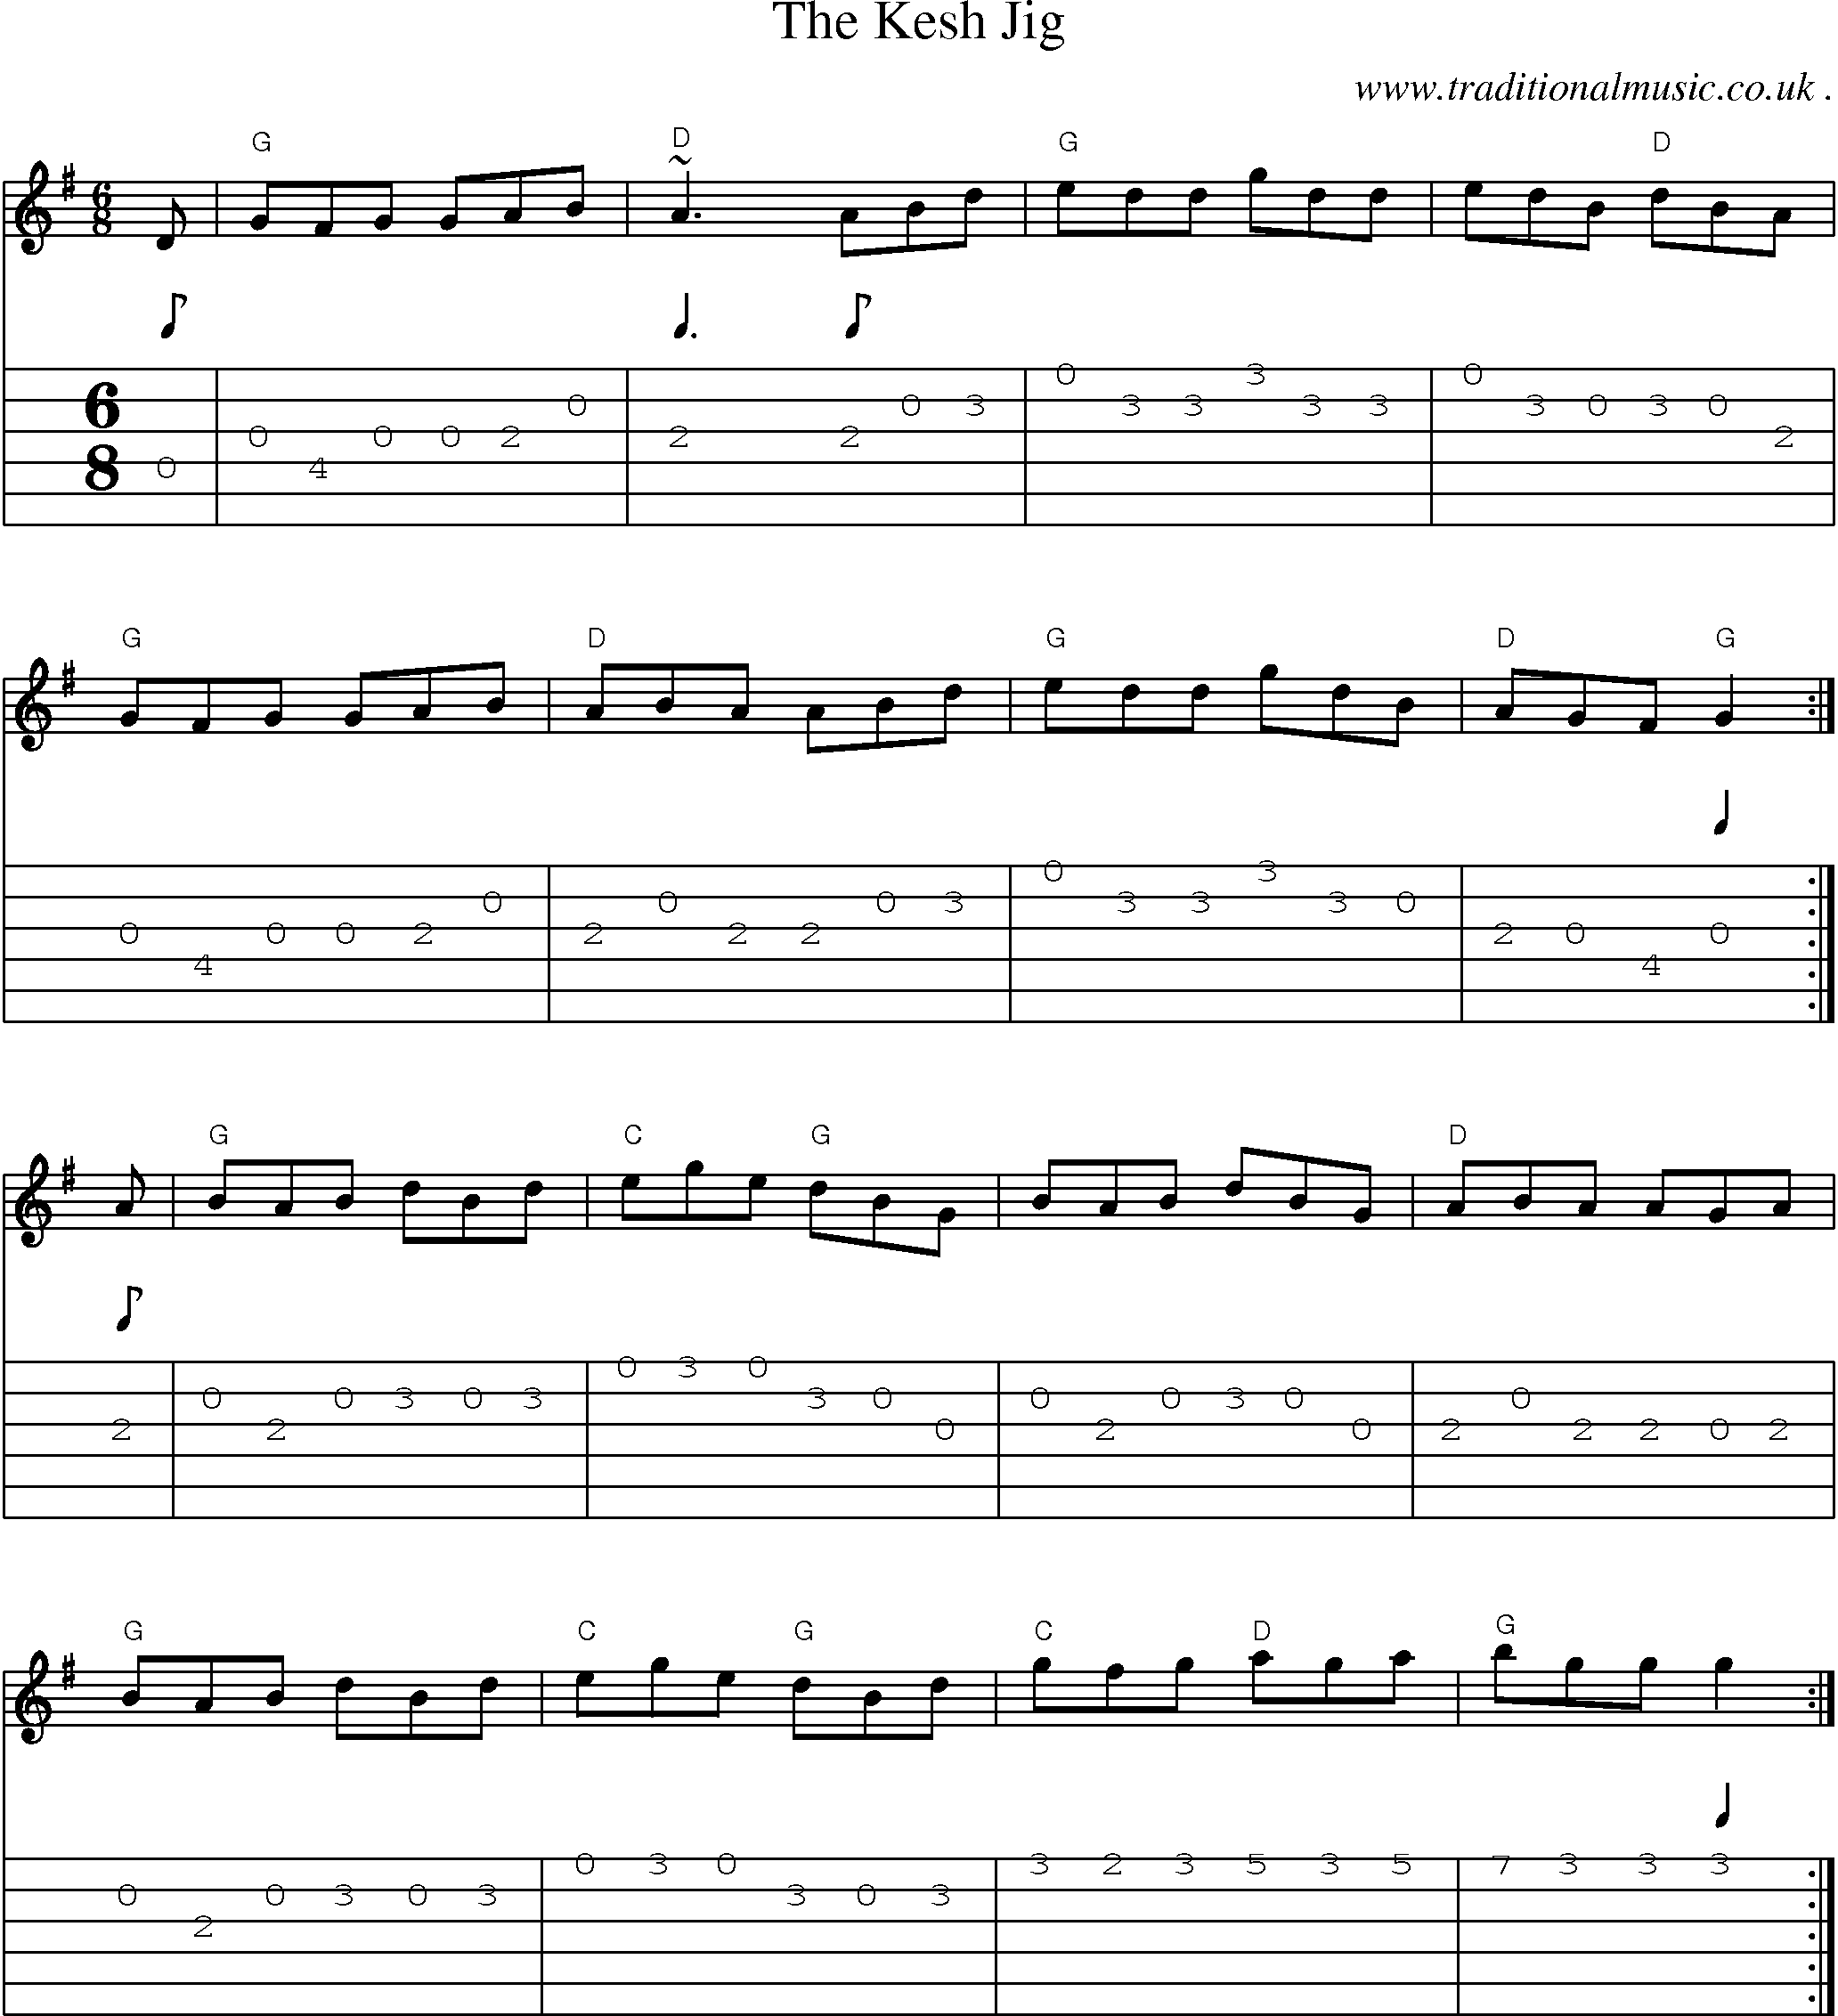 Music Score and Guitar Tabs for The Kesh Jig